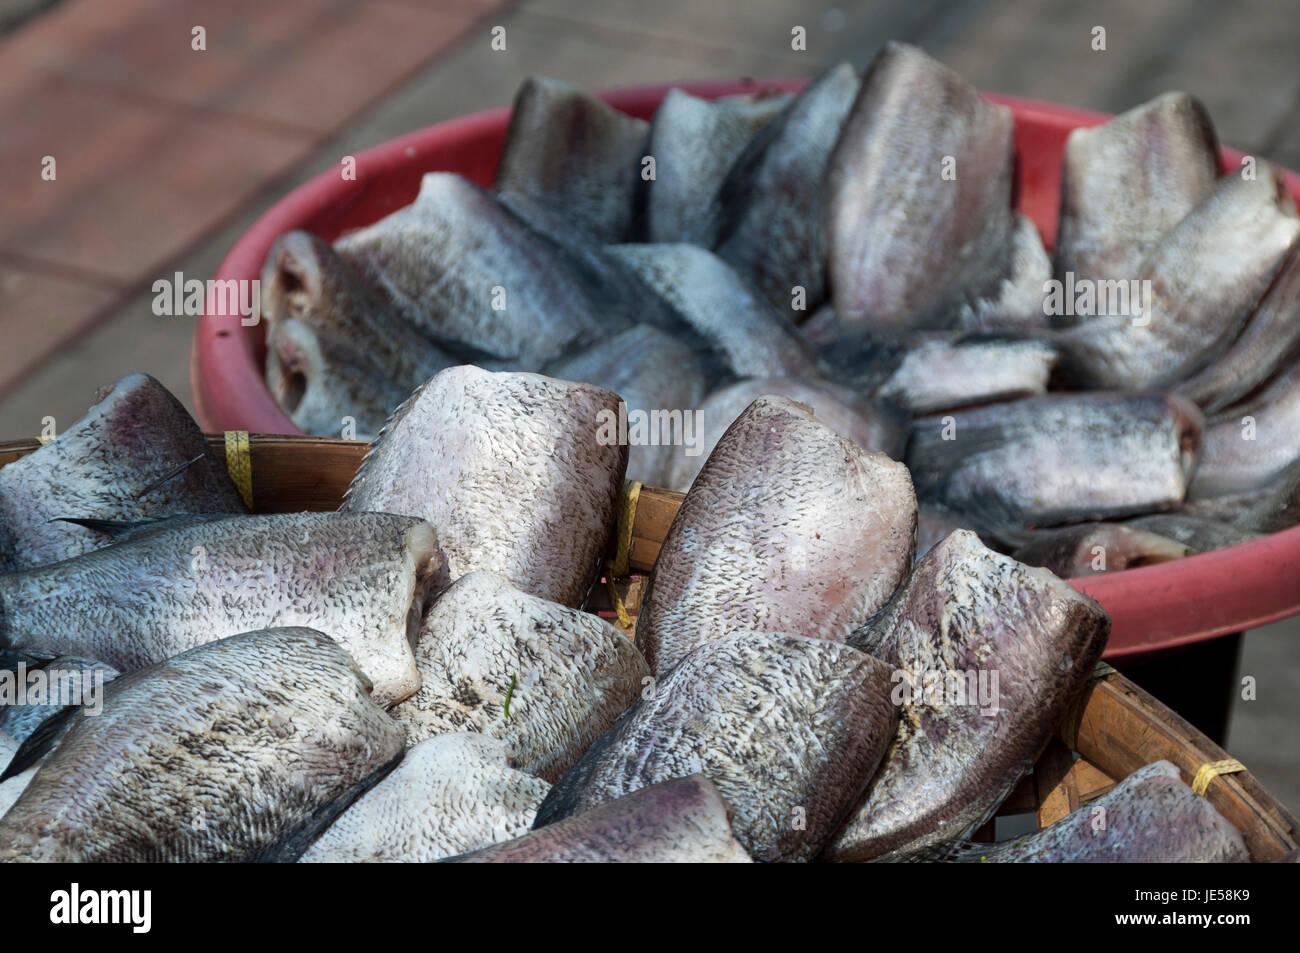 dried gourami fish in market, selective focus Stock Photo